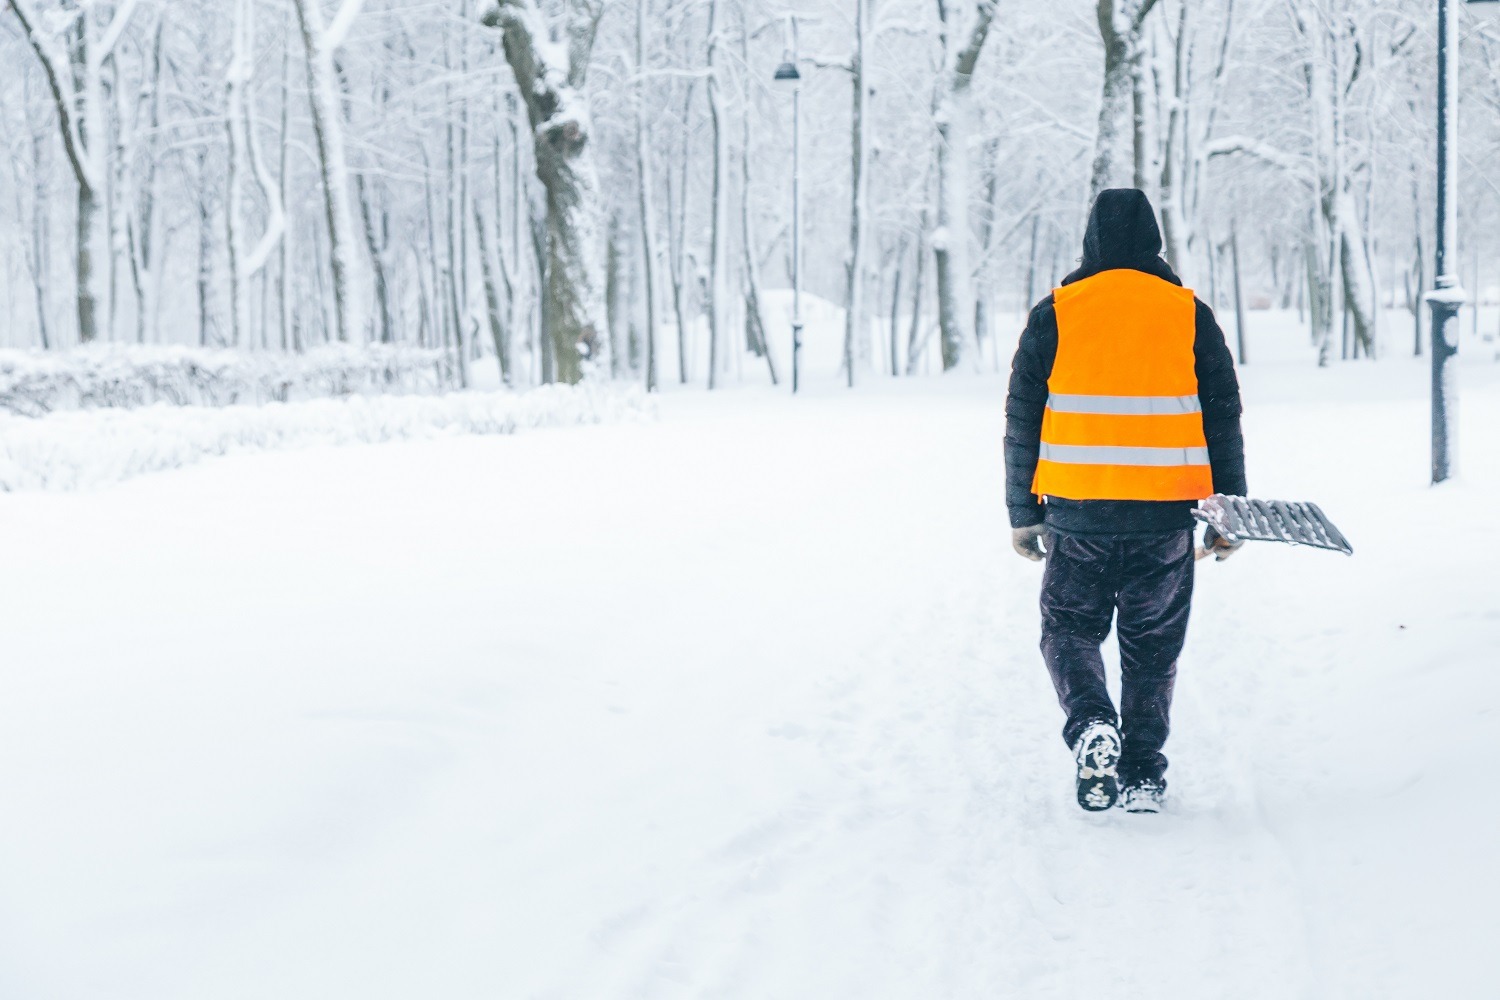 Winter Safety Tips for Lone Workers